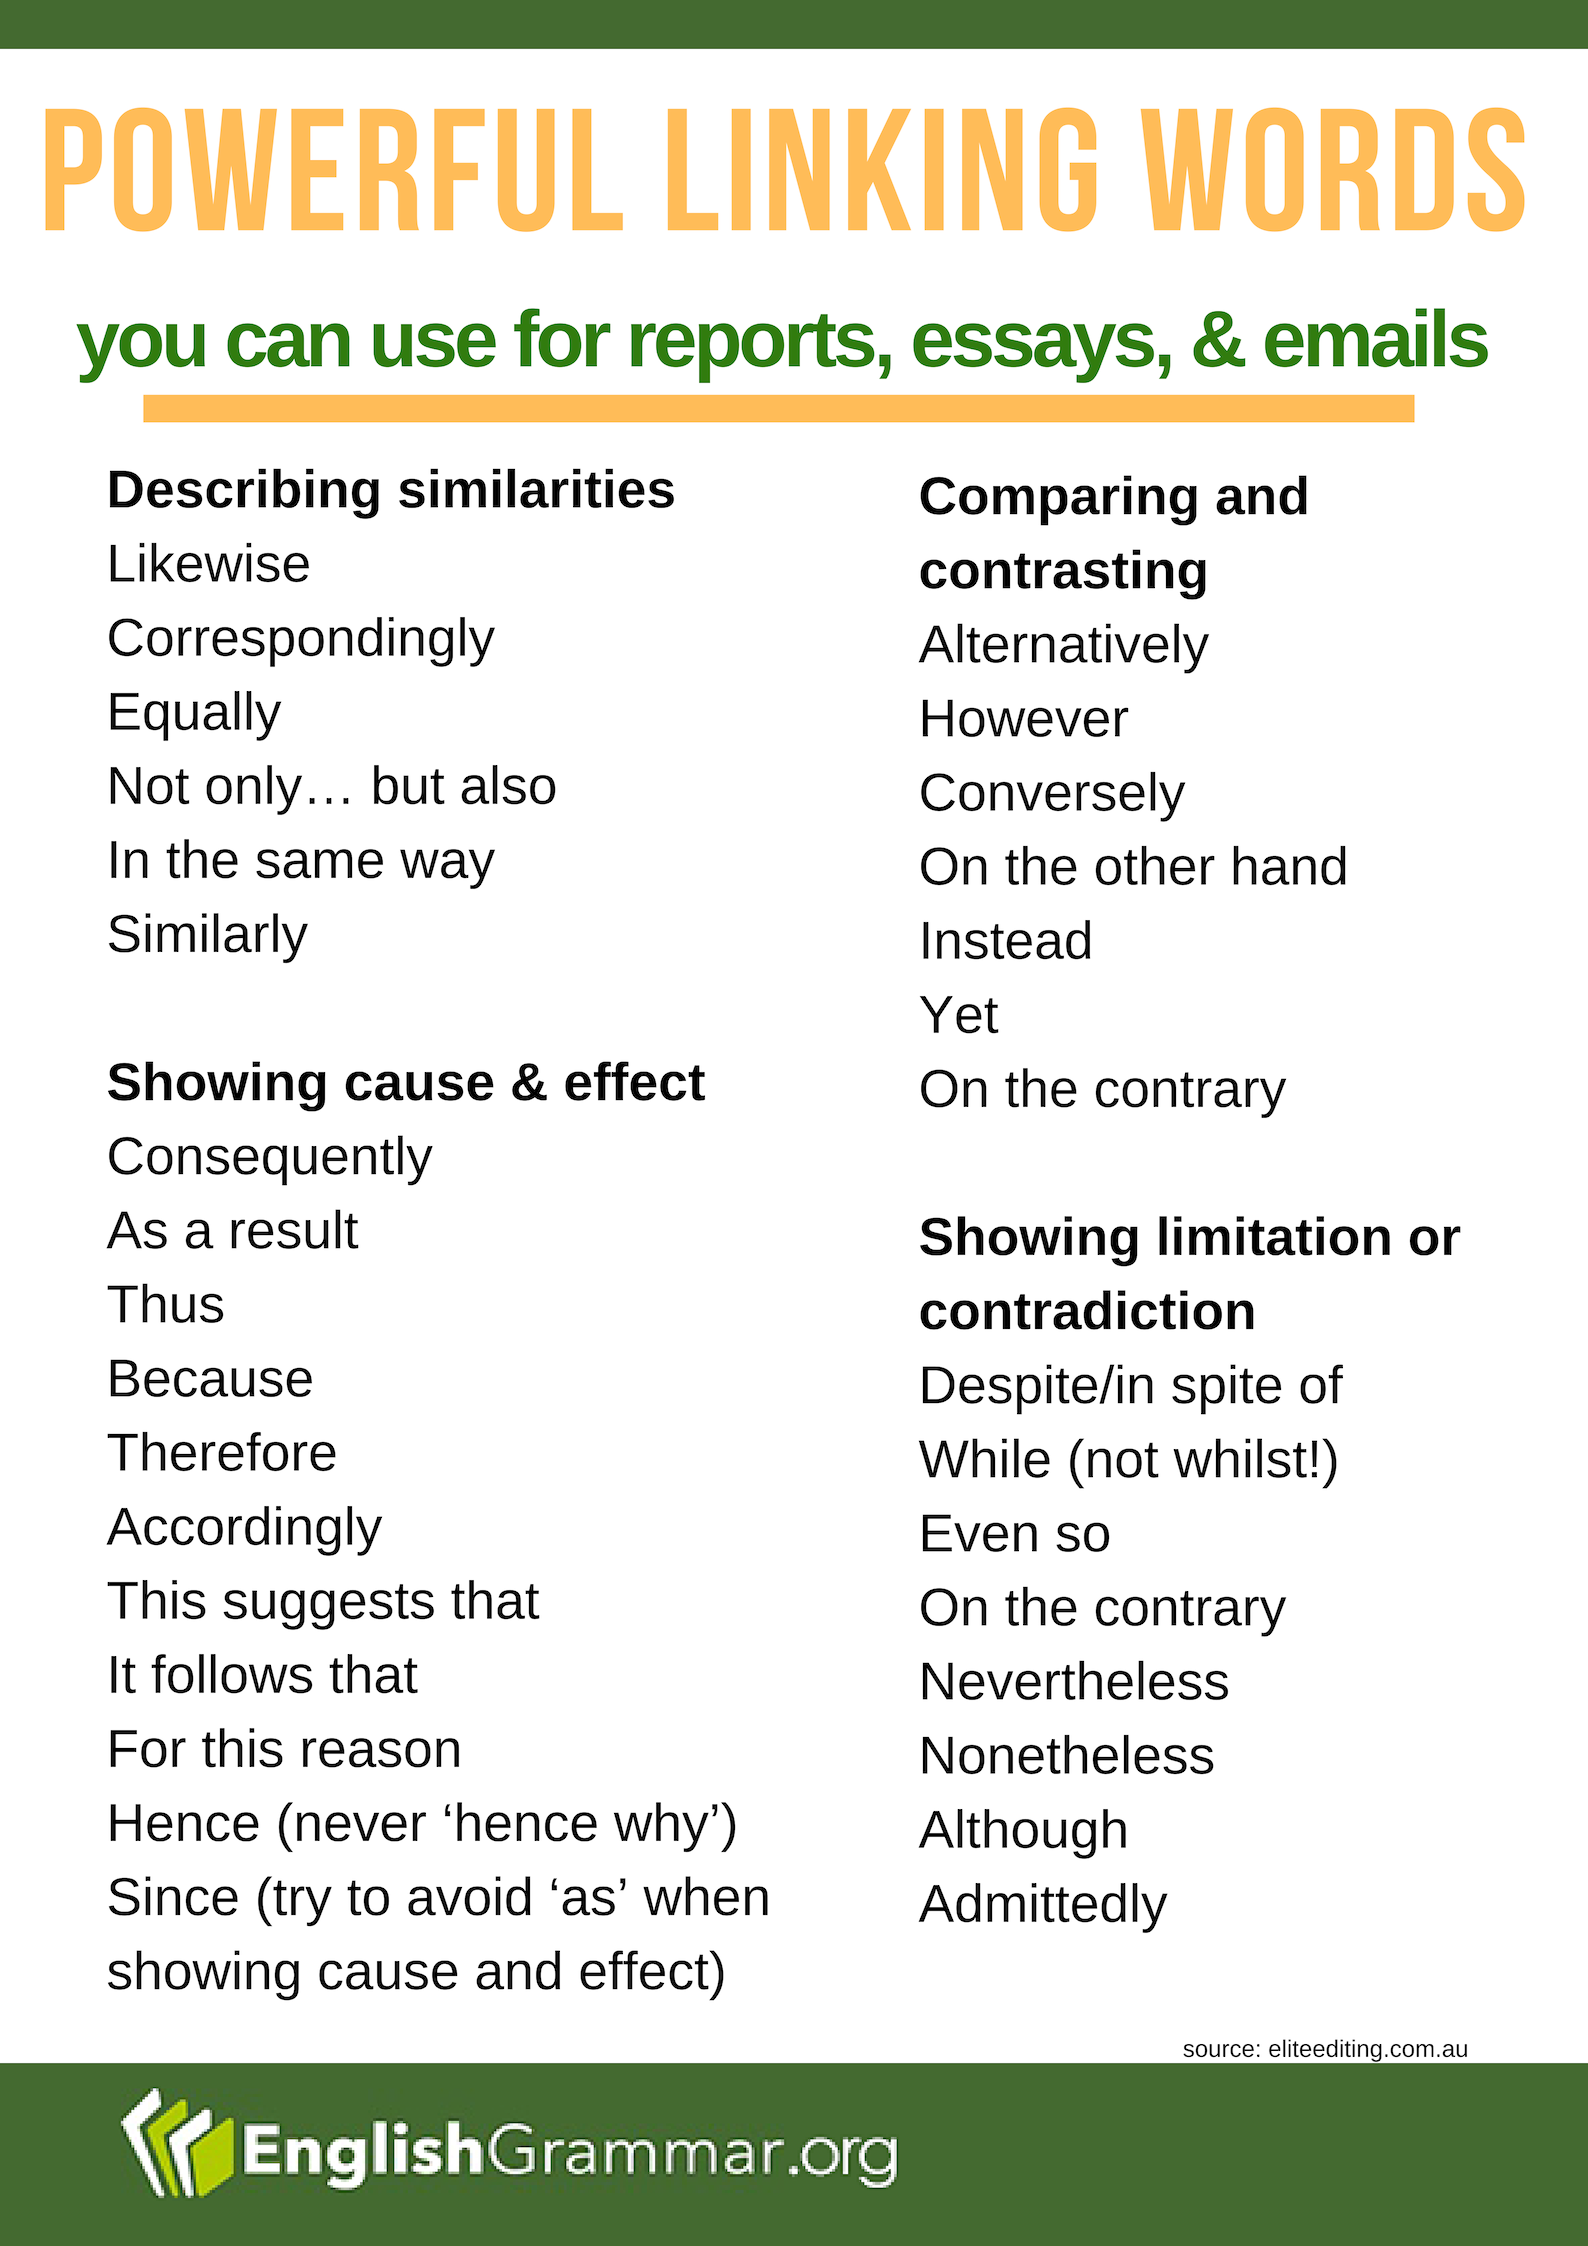 Grammar Corner Linking Words for Writing Reports, Essays, or Emails